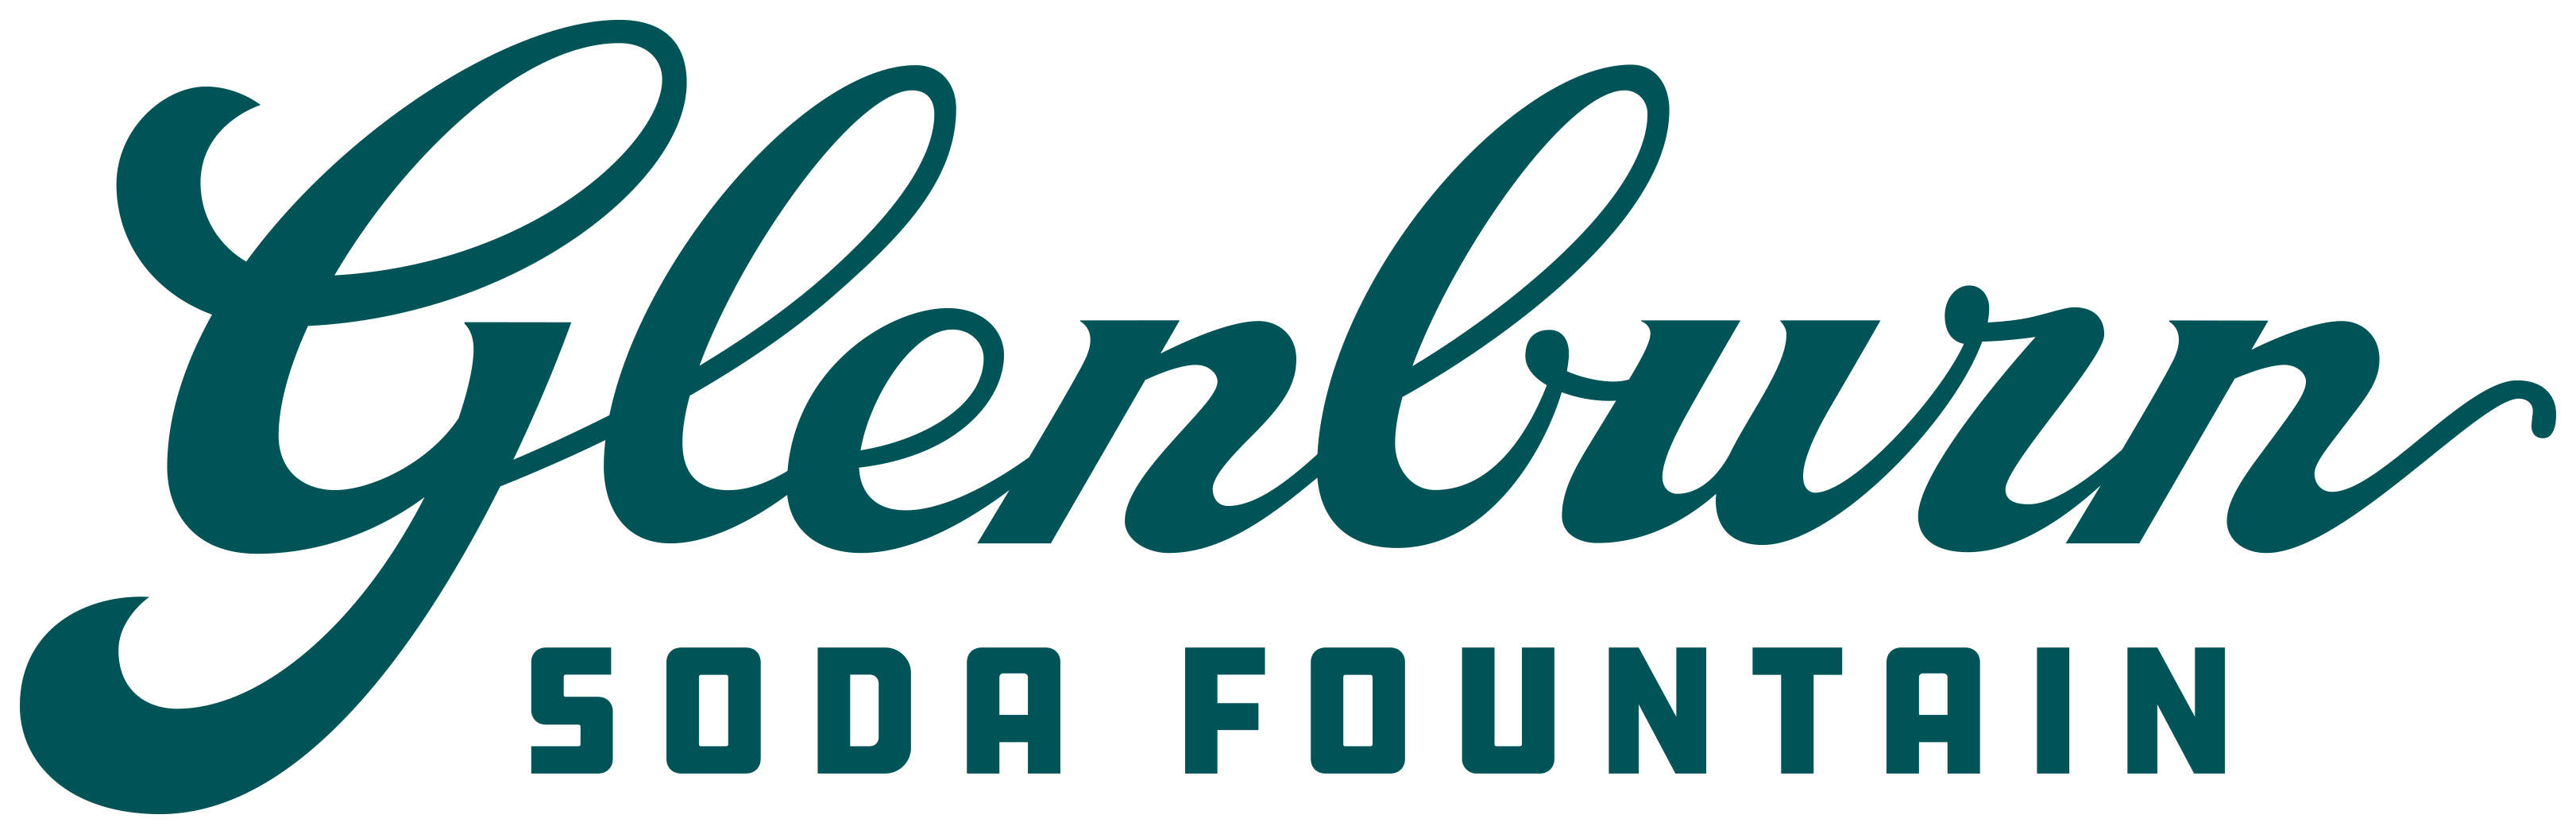 The logo for Glenburn Soda Fountain features the word 'Glenburn' in a flowing, cursive script font in a deep, rich green colour. Below the main wordmark is the phrase 'soda fountain' in a smaller, all-caps, sans-serif font.